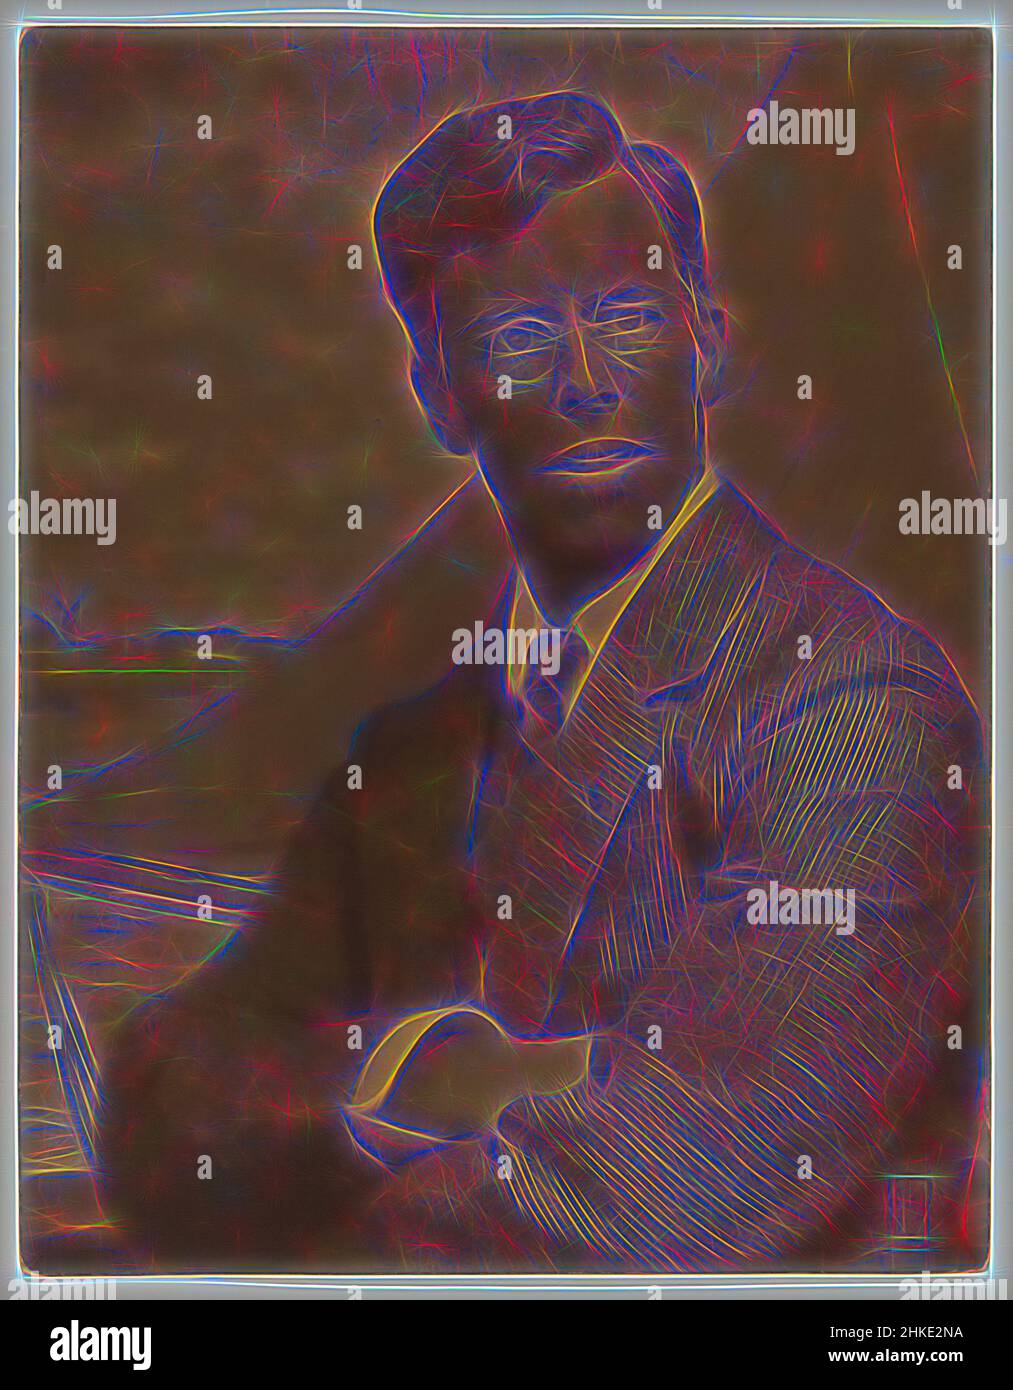 Inspired by Portrait of Jan Feith, Jacob Merkelbach, Amsterdam, 1913, carbon print, height 518 mm × width 402 mm, Reimagined by Artotop. Classic art reinvented with a modern twist. Design of warm cheerful glowing of brightness and light ray radiance. Photography inspired by surrealism and futurism, embracing dynamic energy of modern technology, movement, speed and revolutionize culture Stock Photo